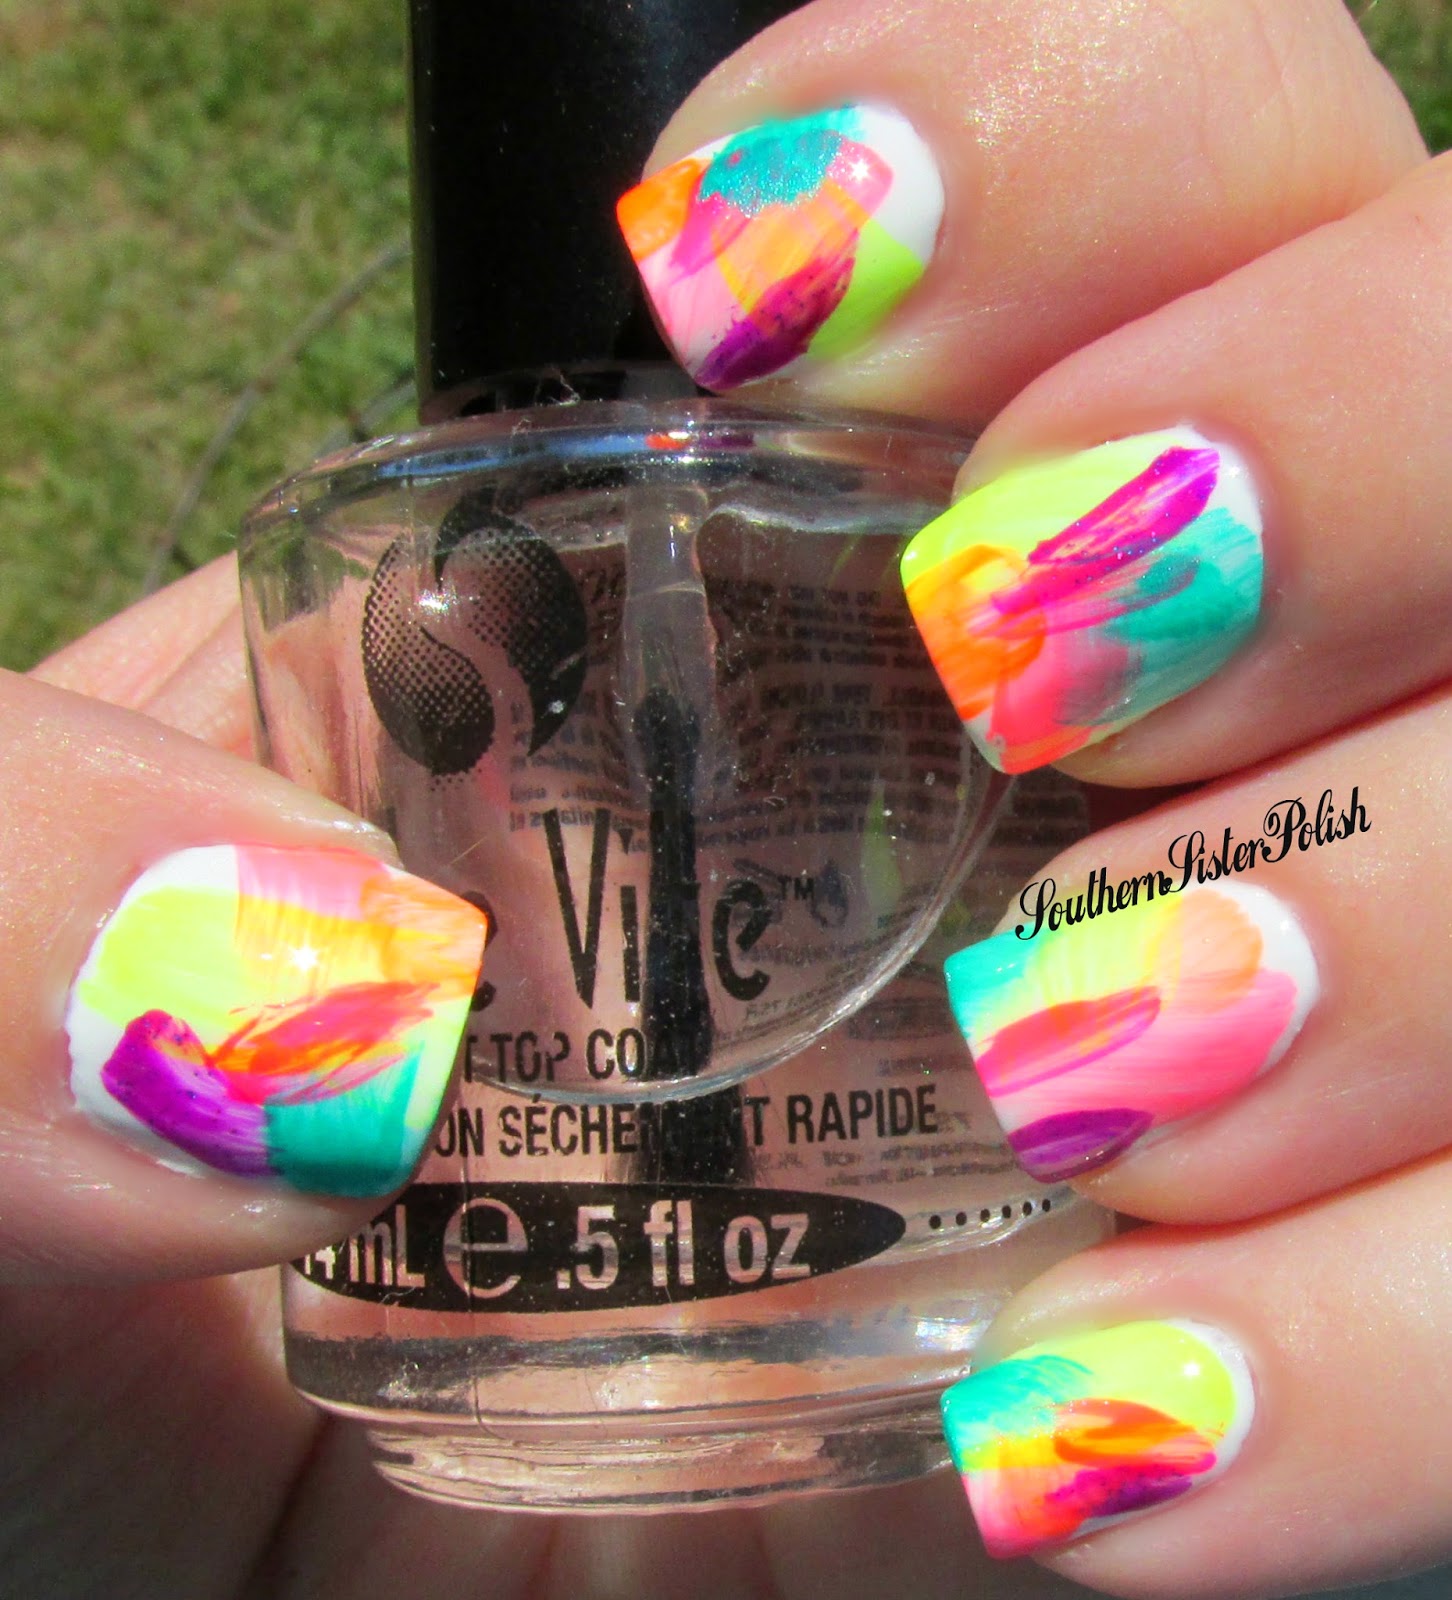 Southern Sister Polish: Who's ready for some neon?